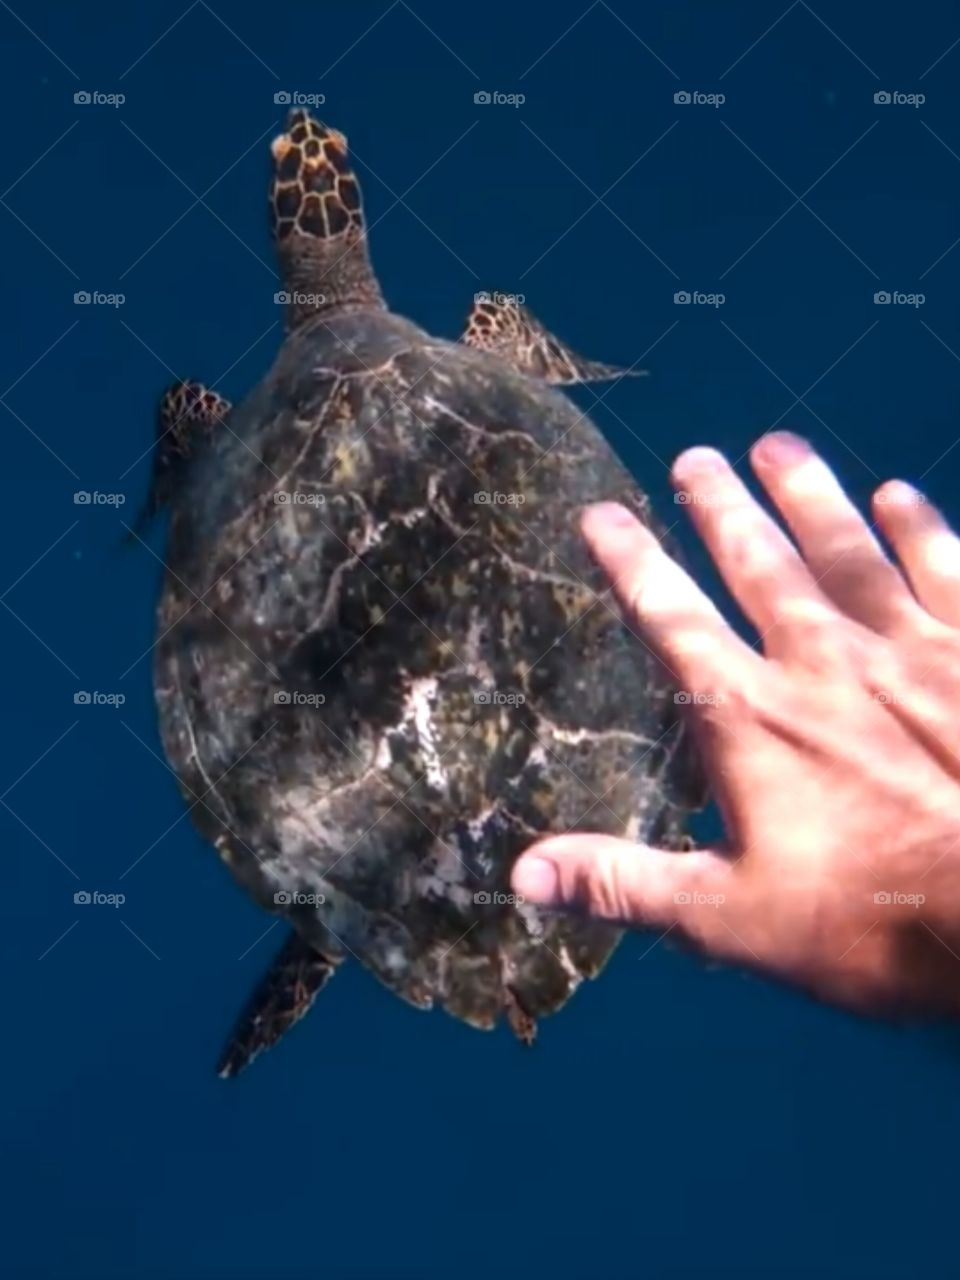 touching the turtle